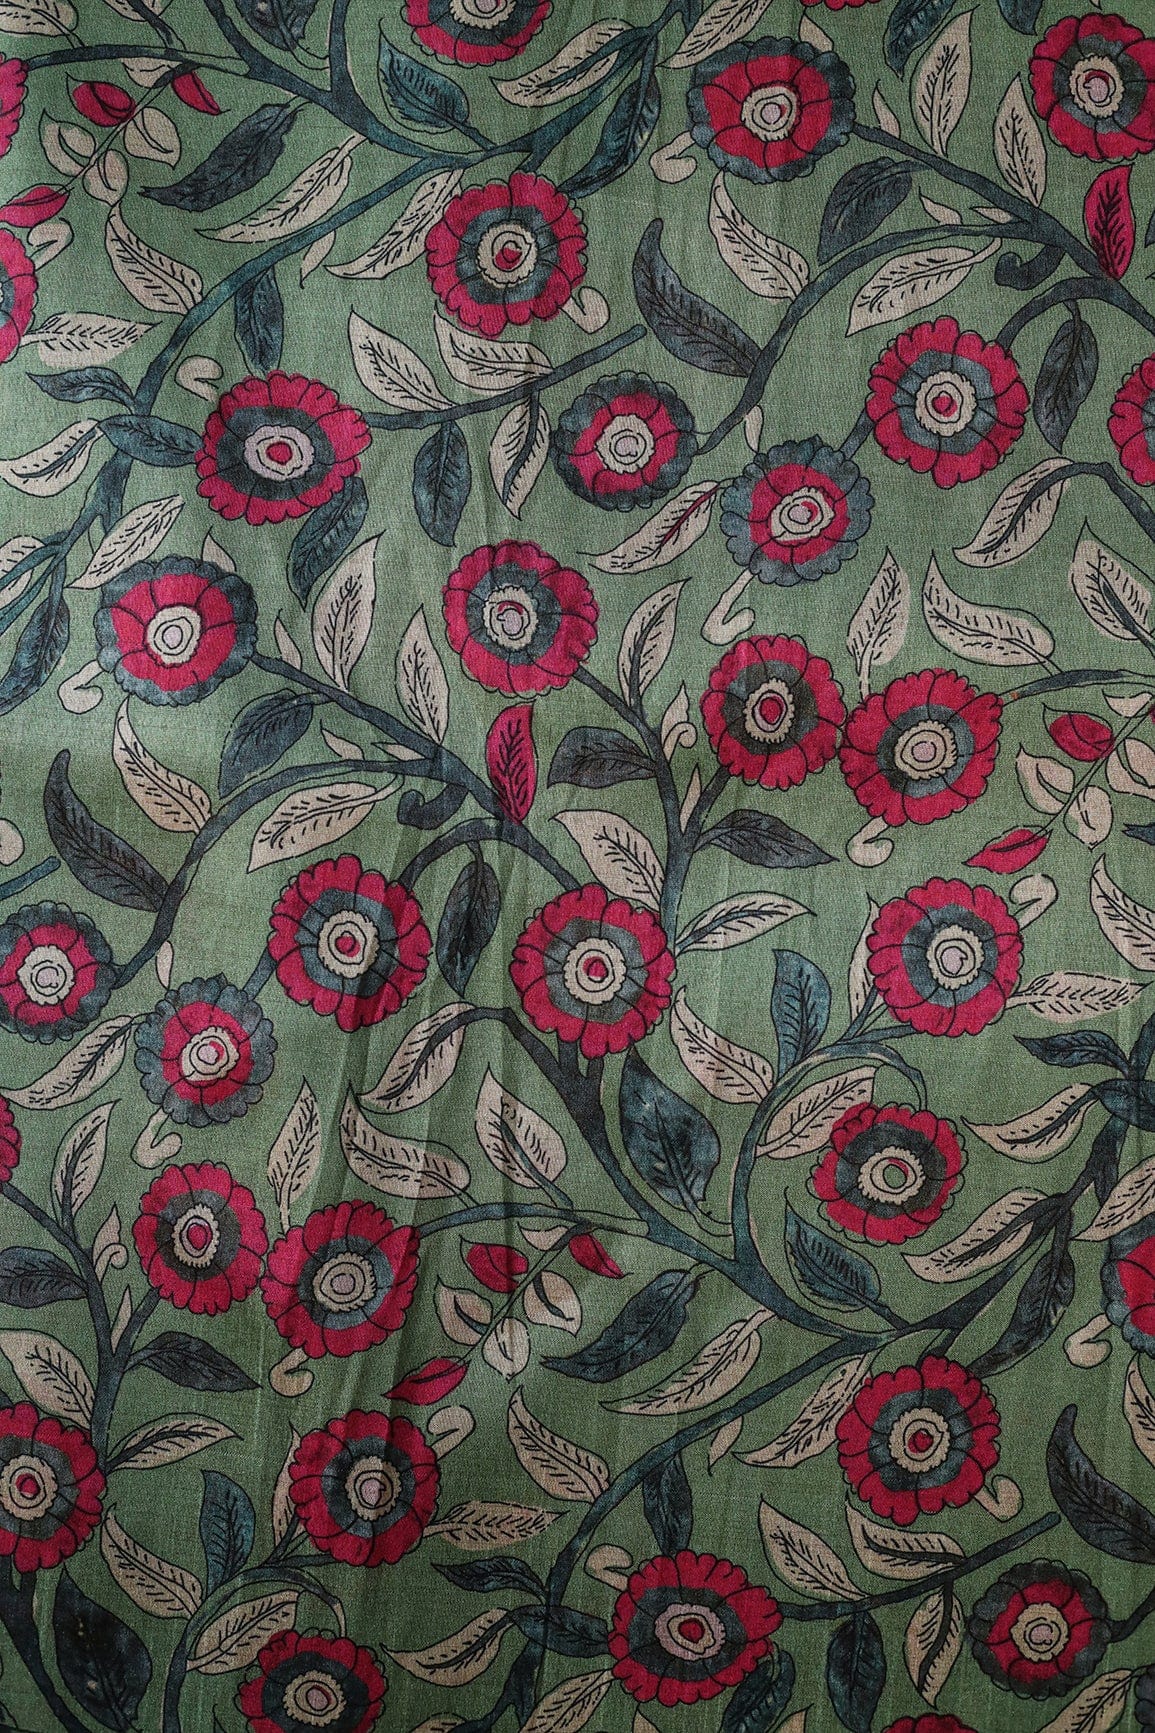 doeraa Prints Olive Green And Red Floral Pattern Digital Print On Mulberry Silk Fabric